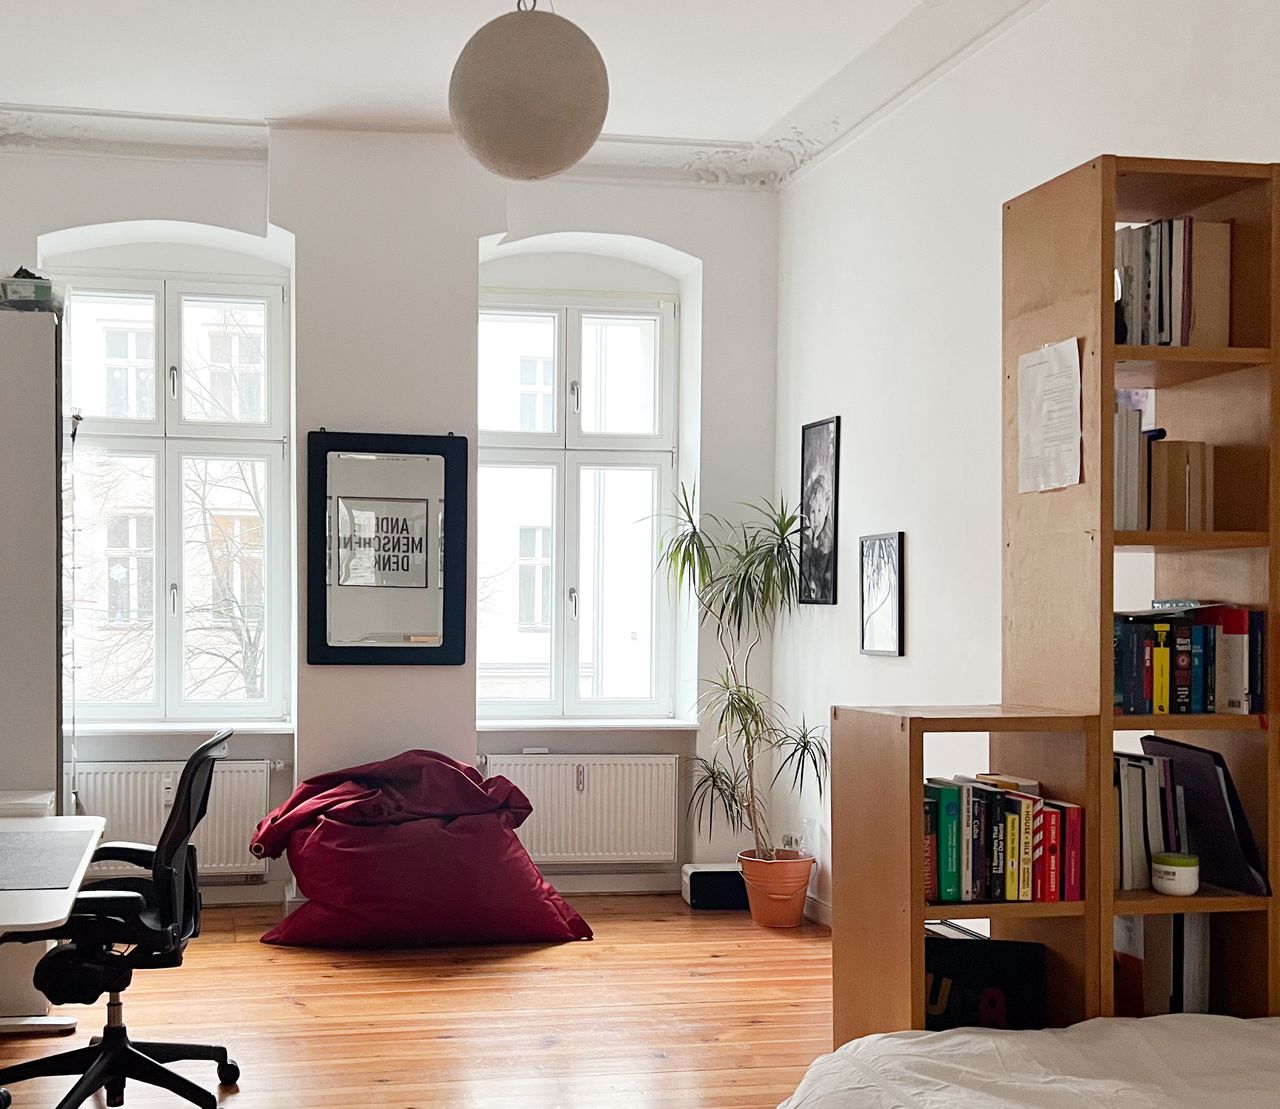 Large flat in Friedrichshain with cat